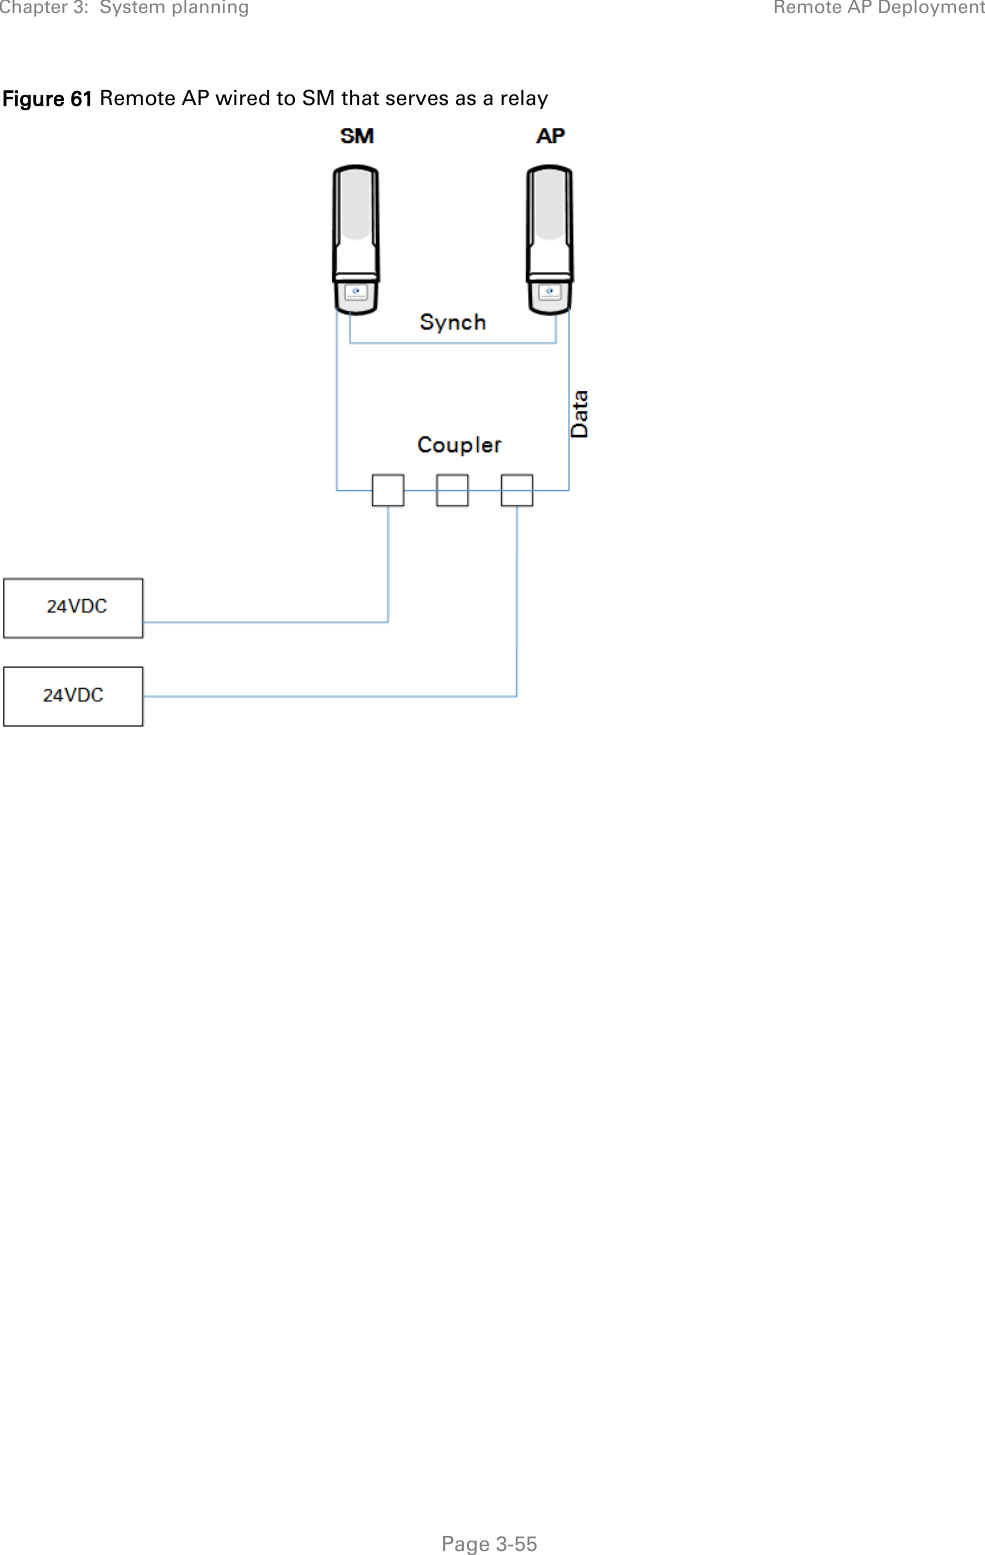 Chapter 3:  System planning Remote AP Deployment   Page 3-55 Figure 61 Remote AP wired to SM that serves as a relay    